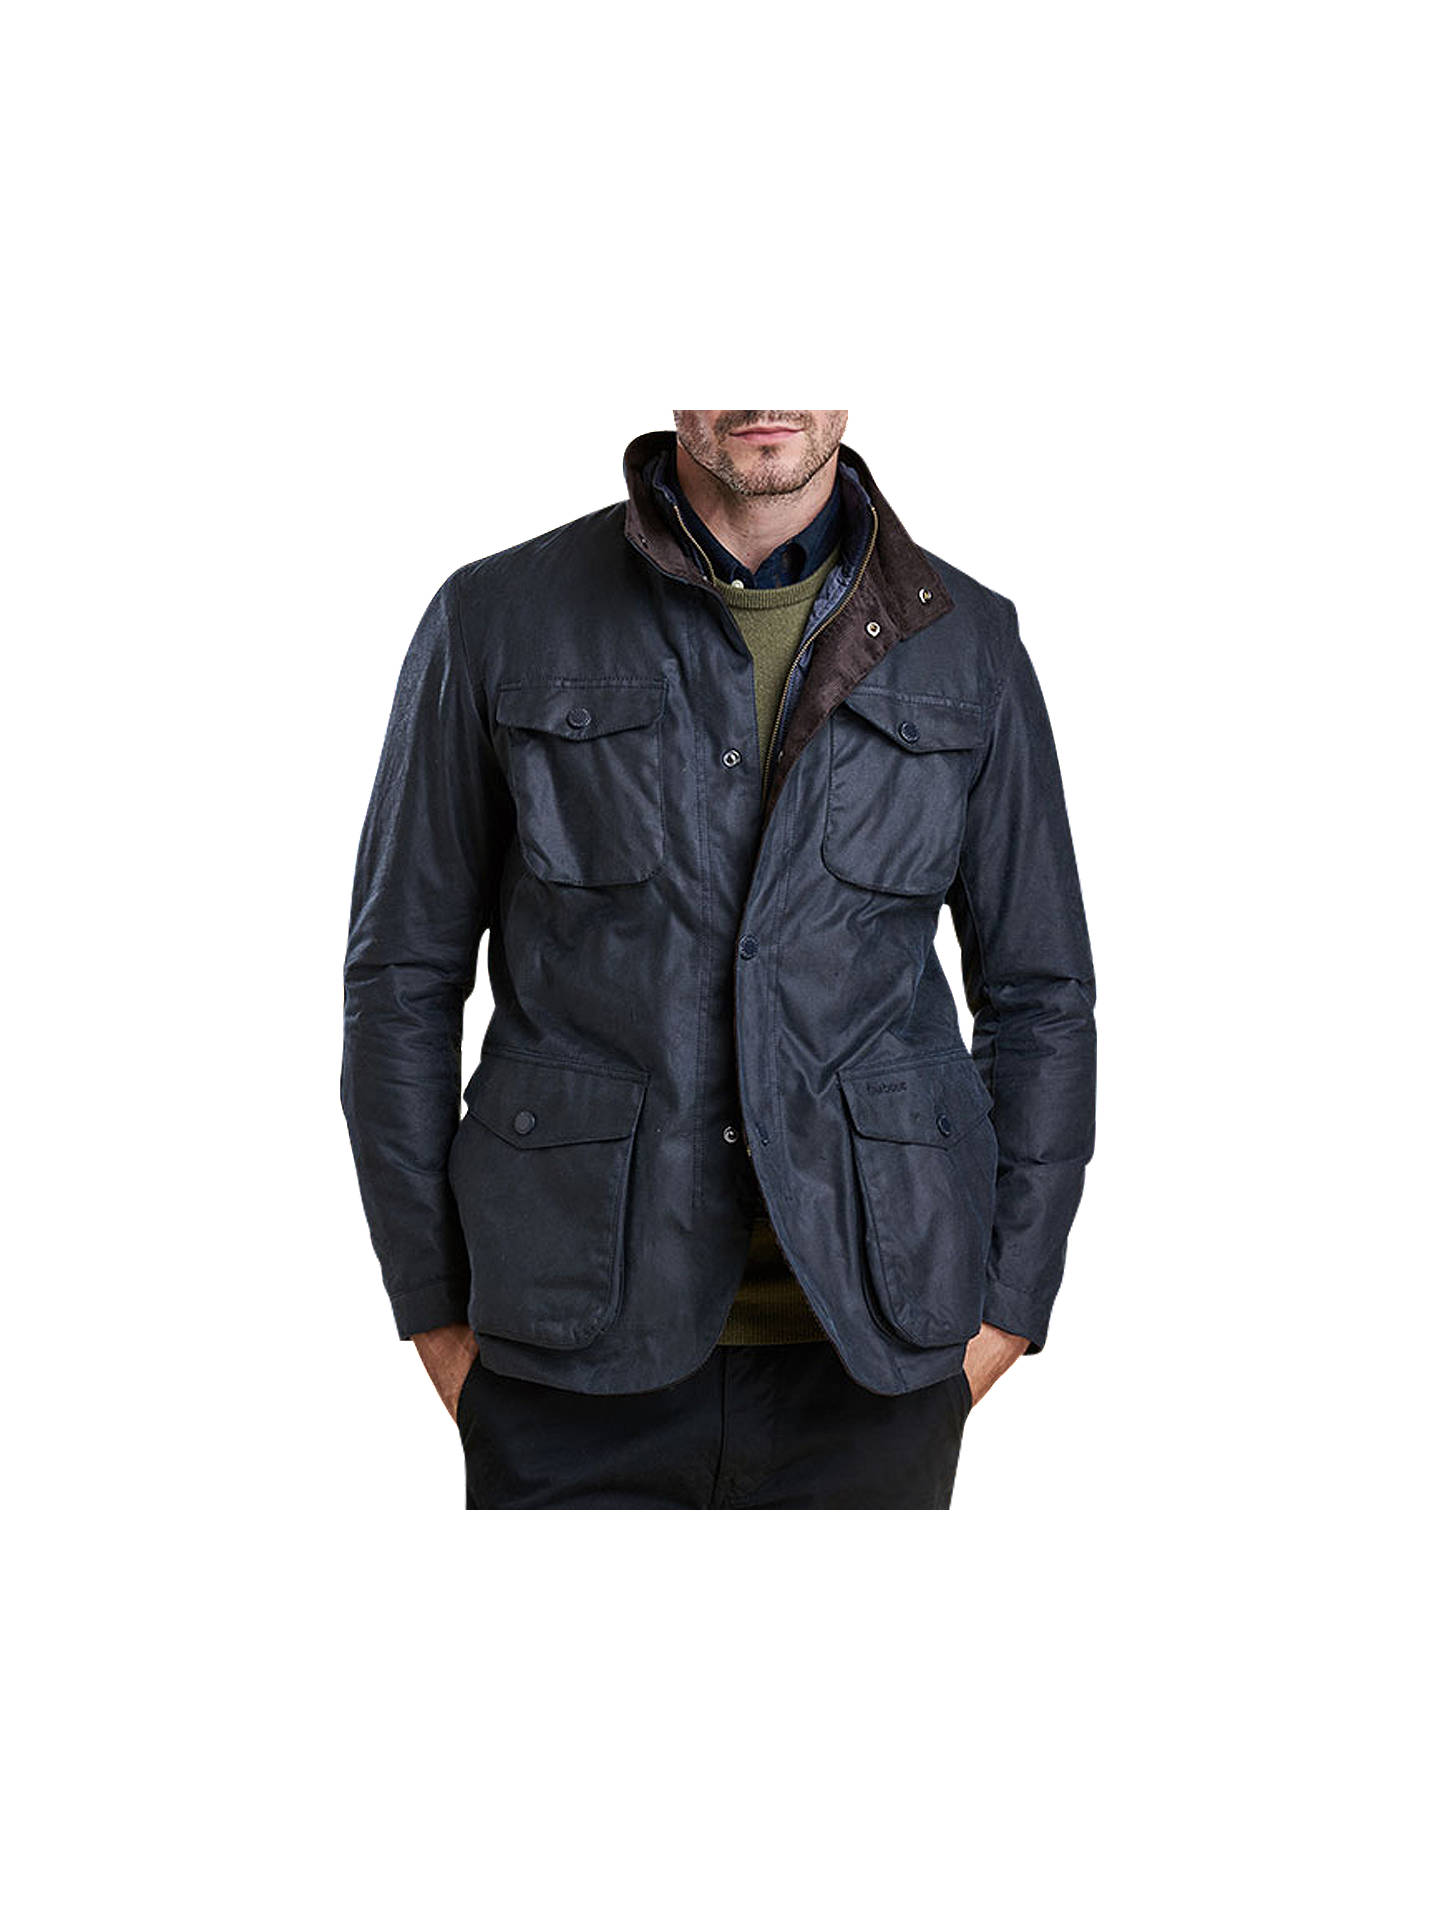 Barbour Ogston Waxed Jacket, Navy at John Lewis & Partners